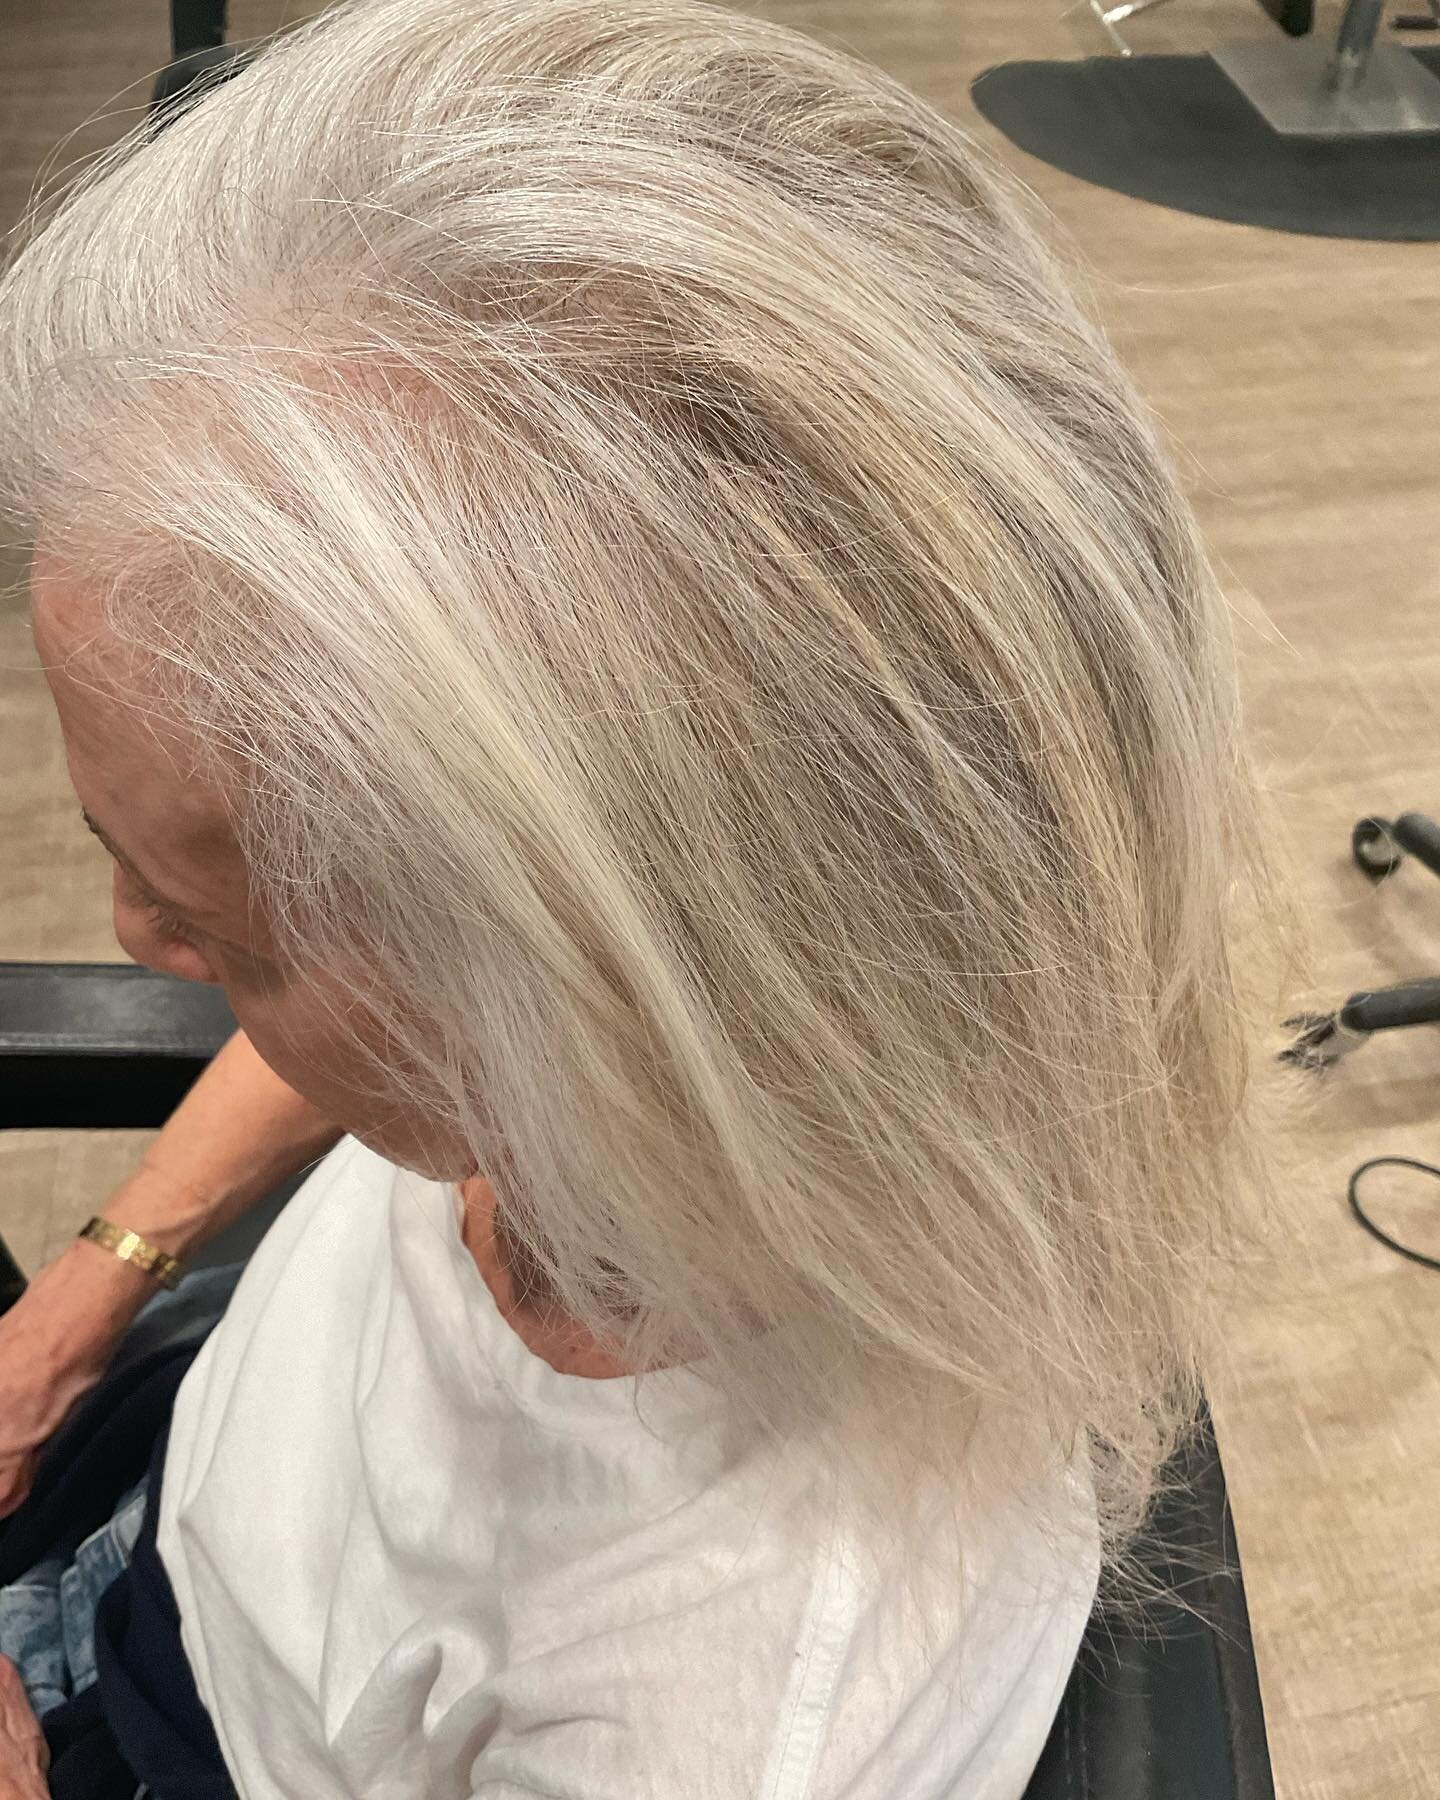 Going in from grey to a way more fun dimensional strawberry that incorporates natural gray, For a little bit is dimensional end result.  #AmmoniaFreeColor #ColorCorrectionSpecialist #HairColorCorrection #colorcorrectionLaJolla
#Hairtutorial #hairtuto